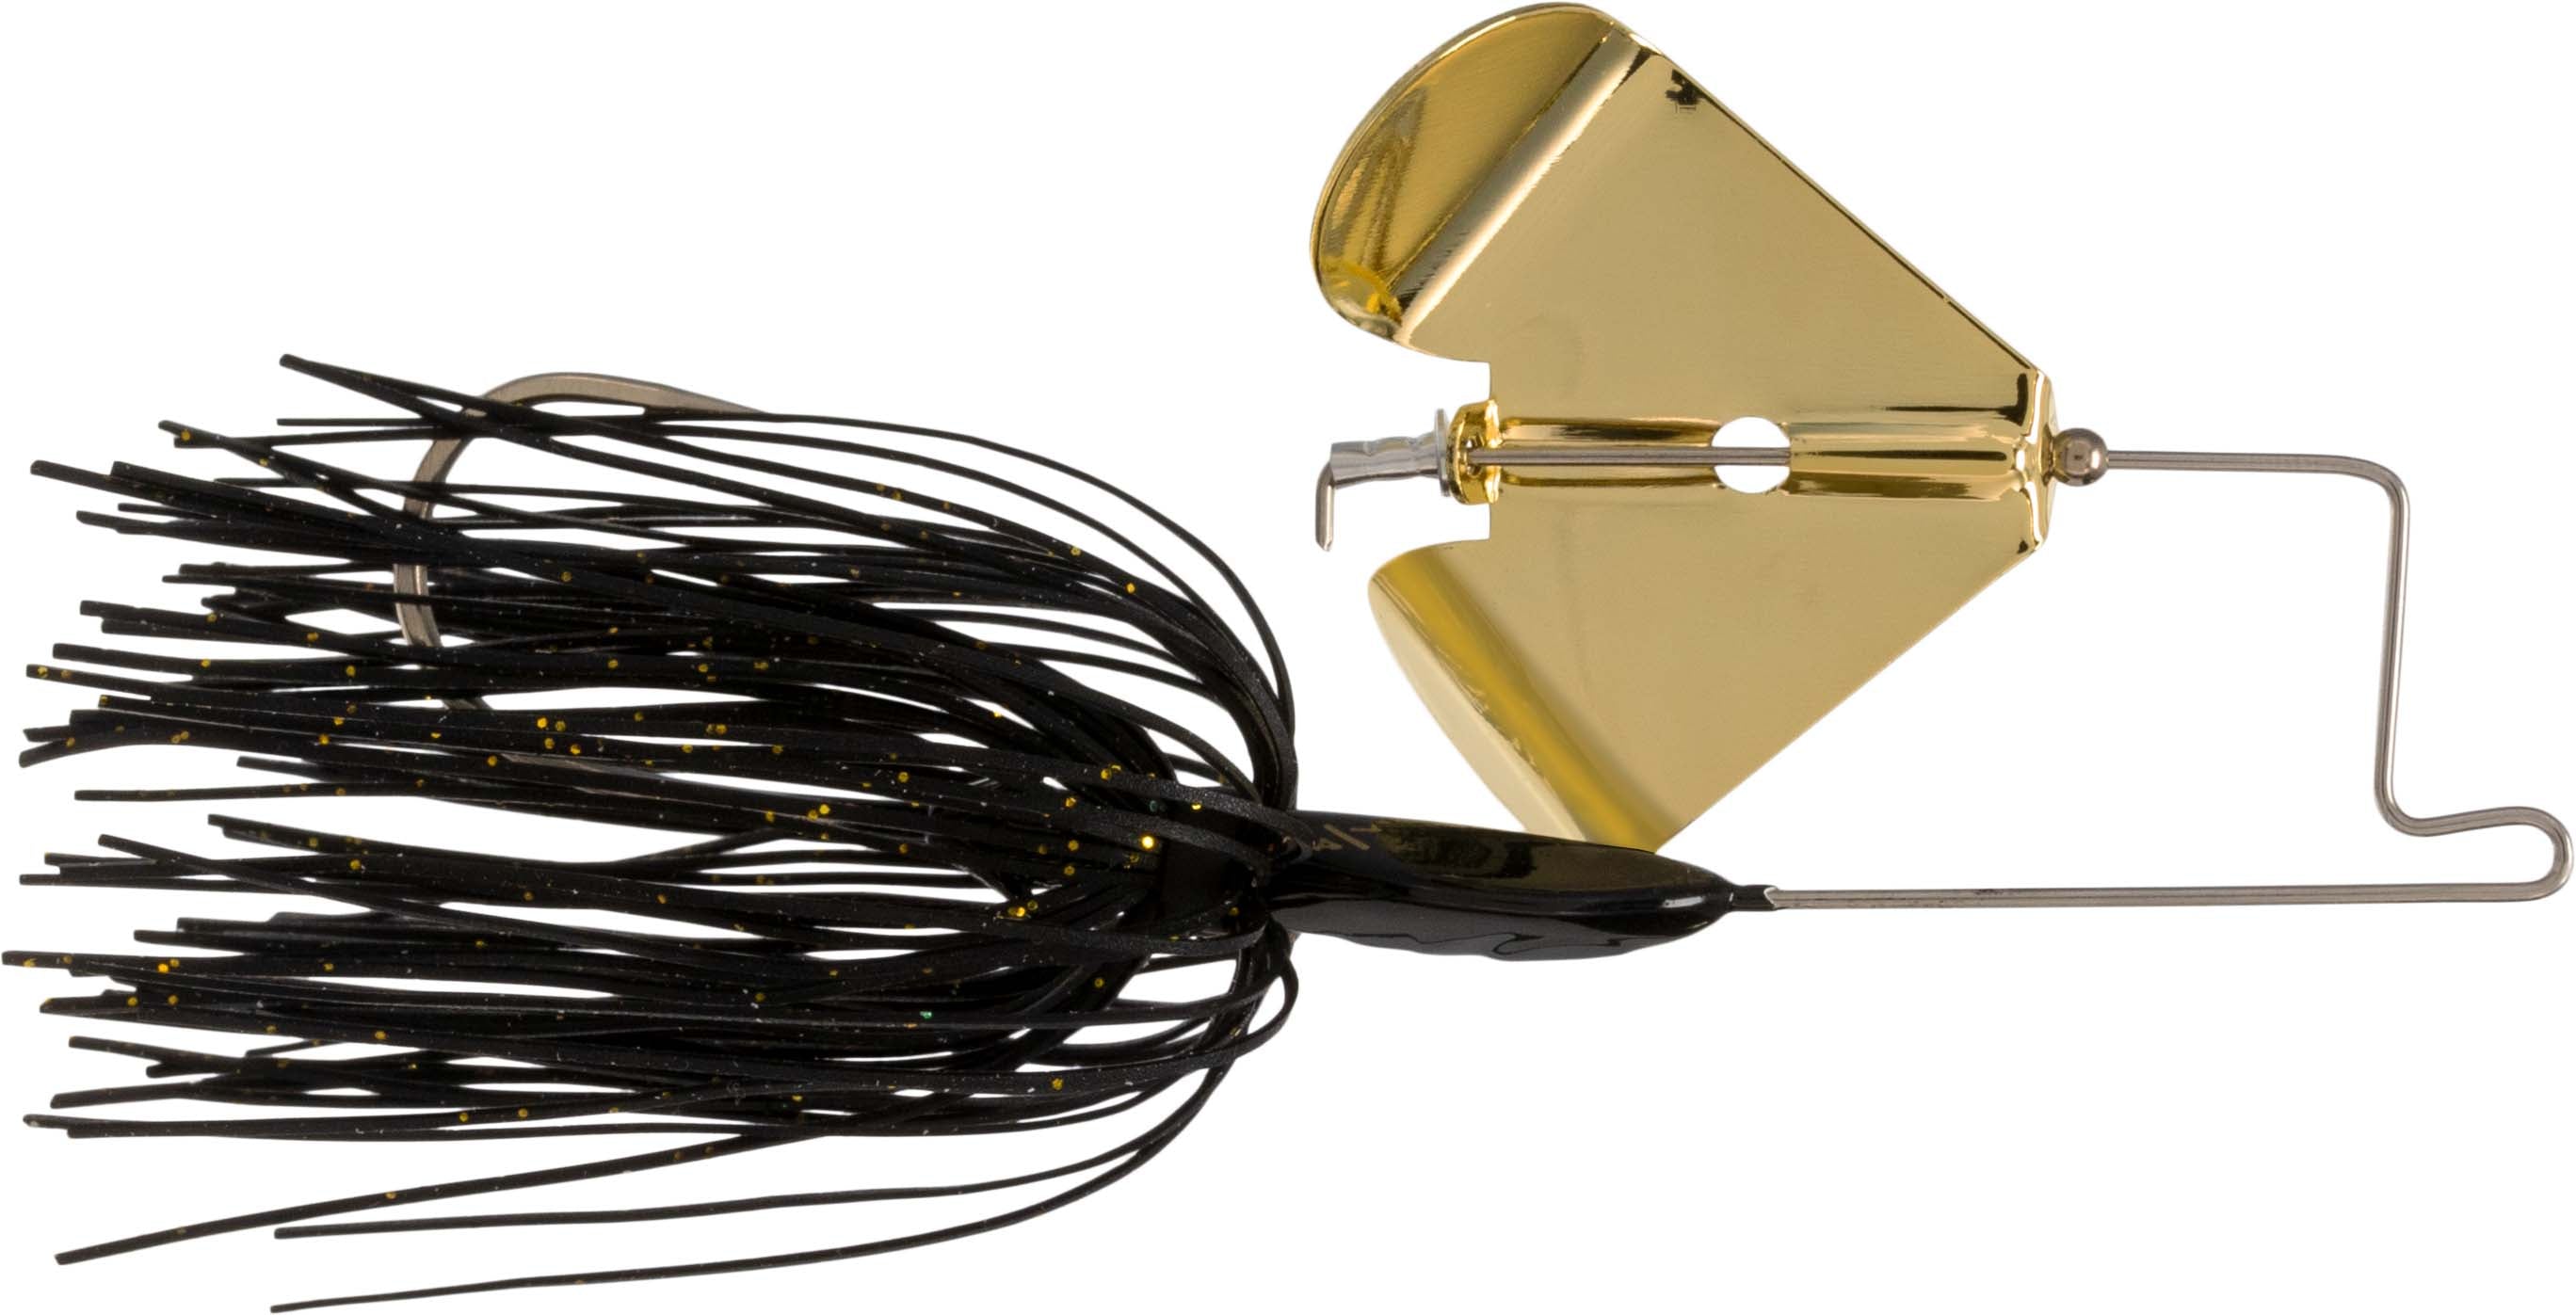 Buckeye Lures Spot Remover Finesse Jig - Black